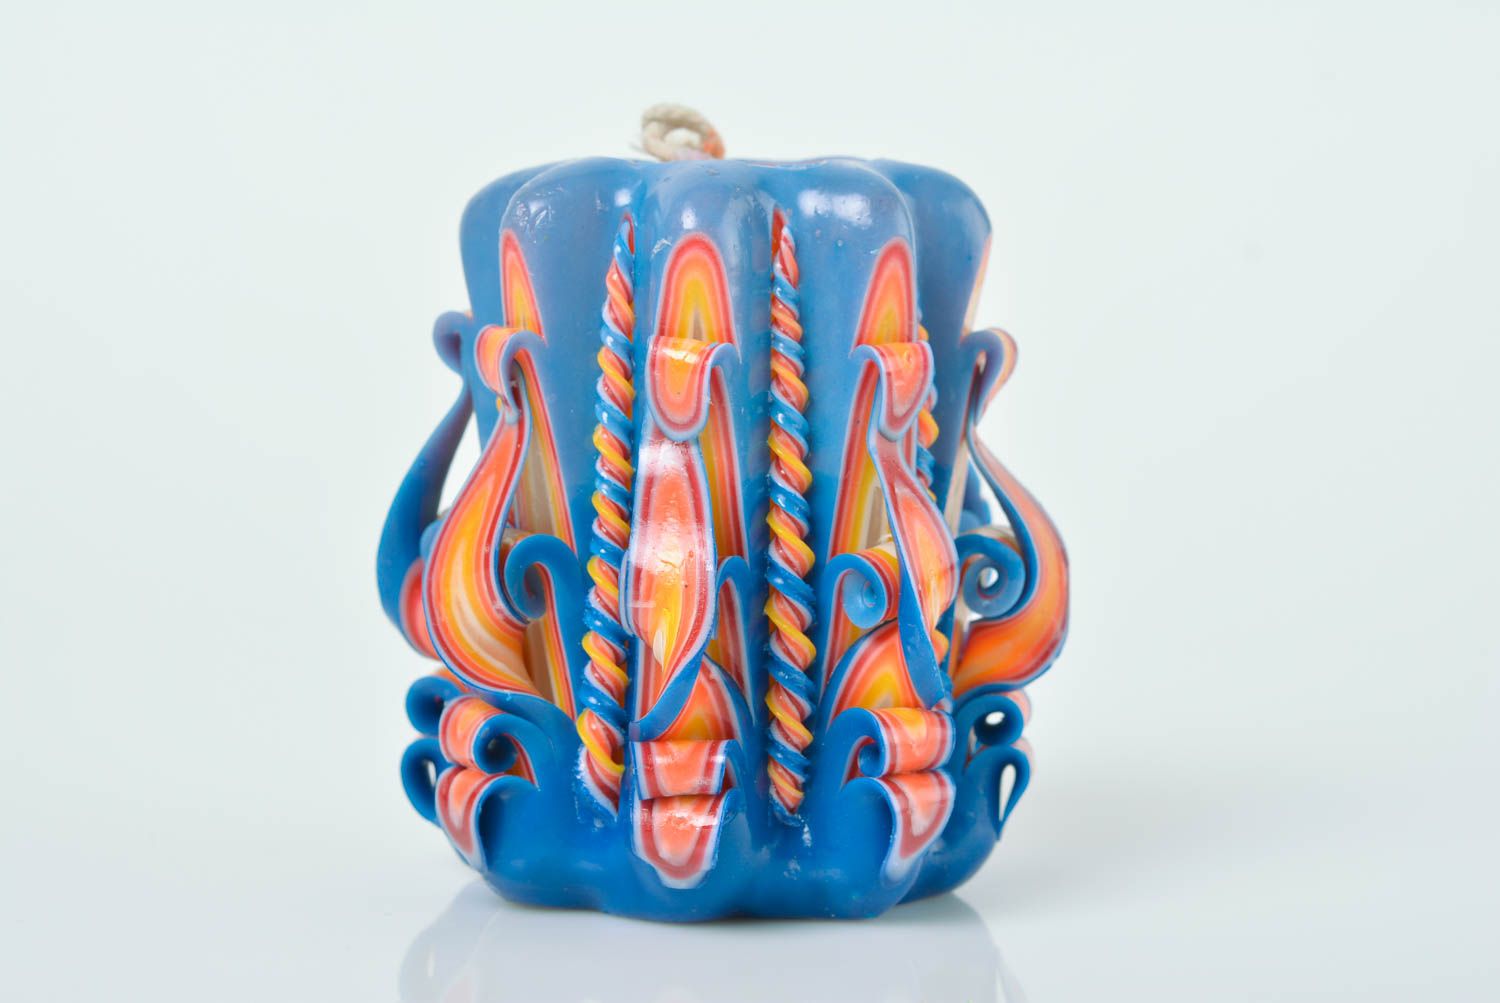 Orange and blue handmade carved paraffin candle for home interior decor photo 1